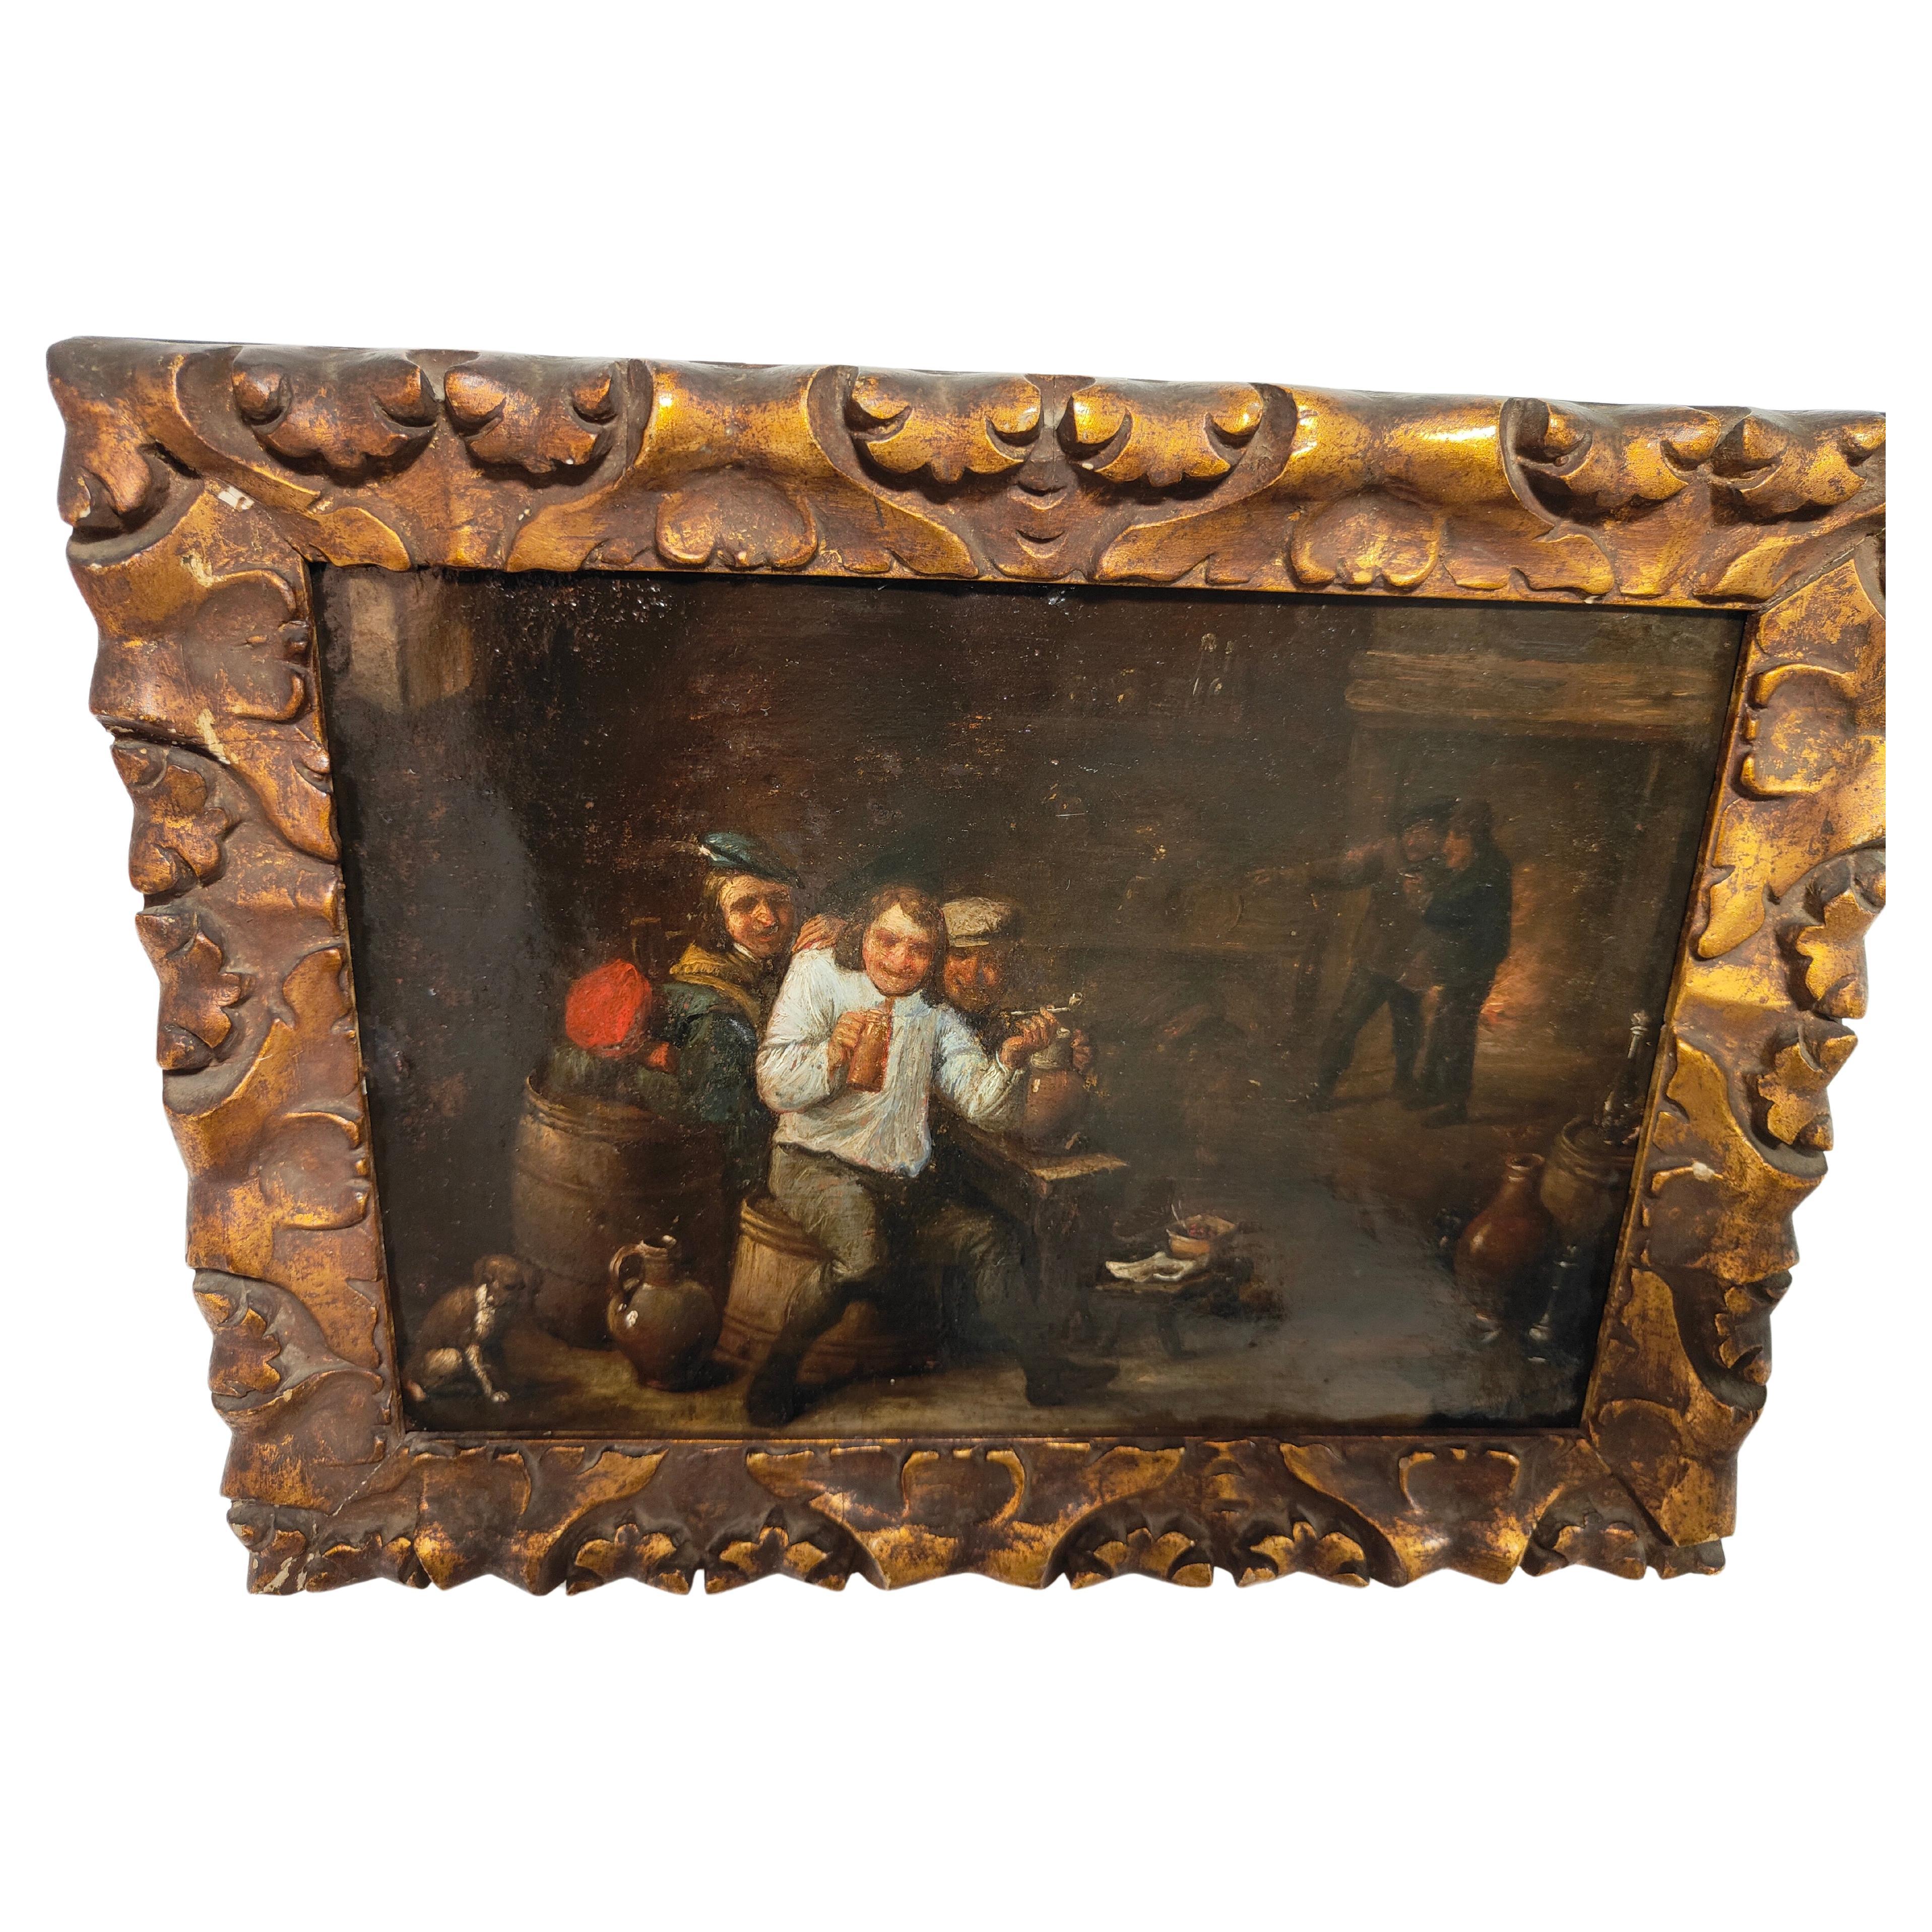  Oil on Copper in the Style of David Teniers, Charming 17th Century Oil Painting